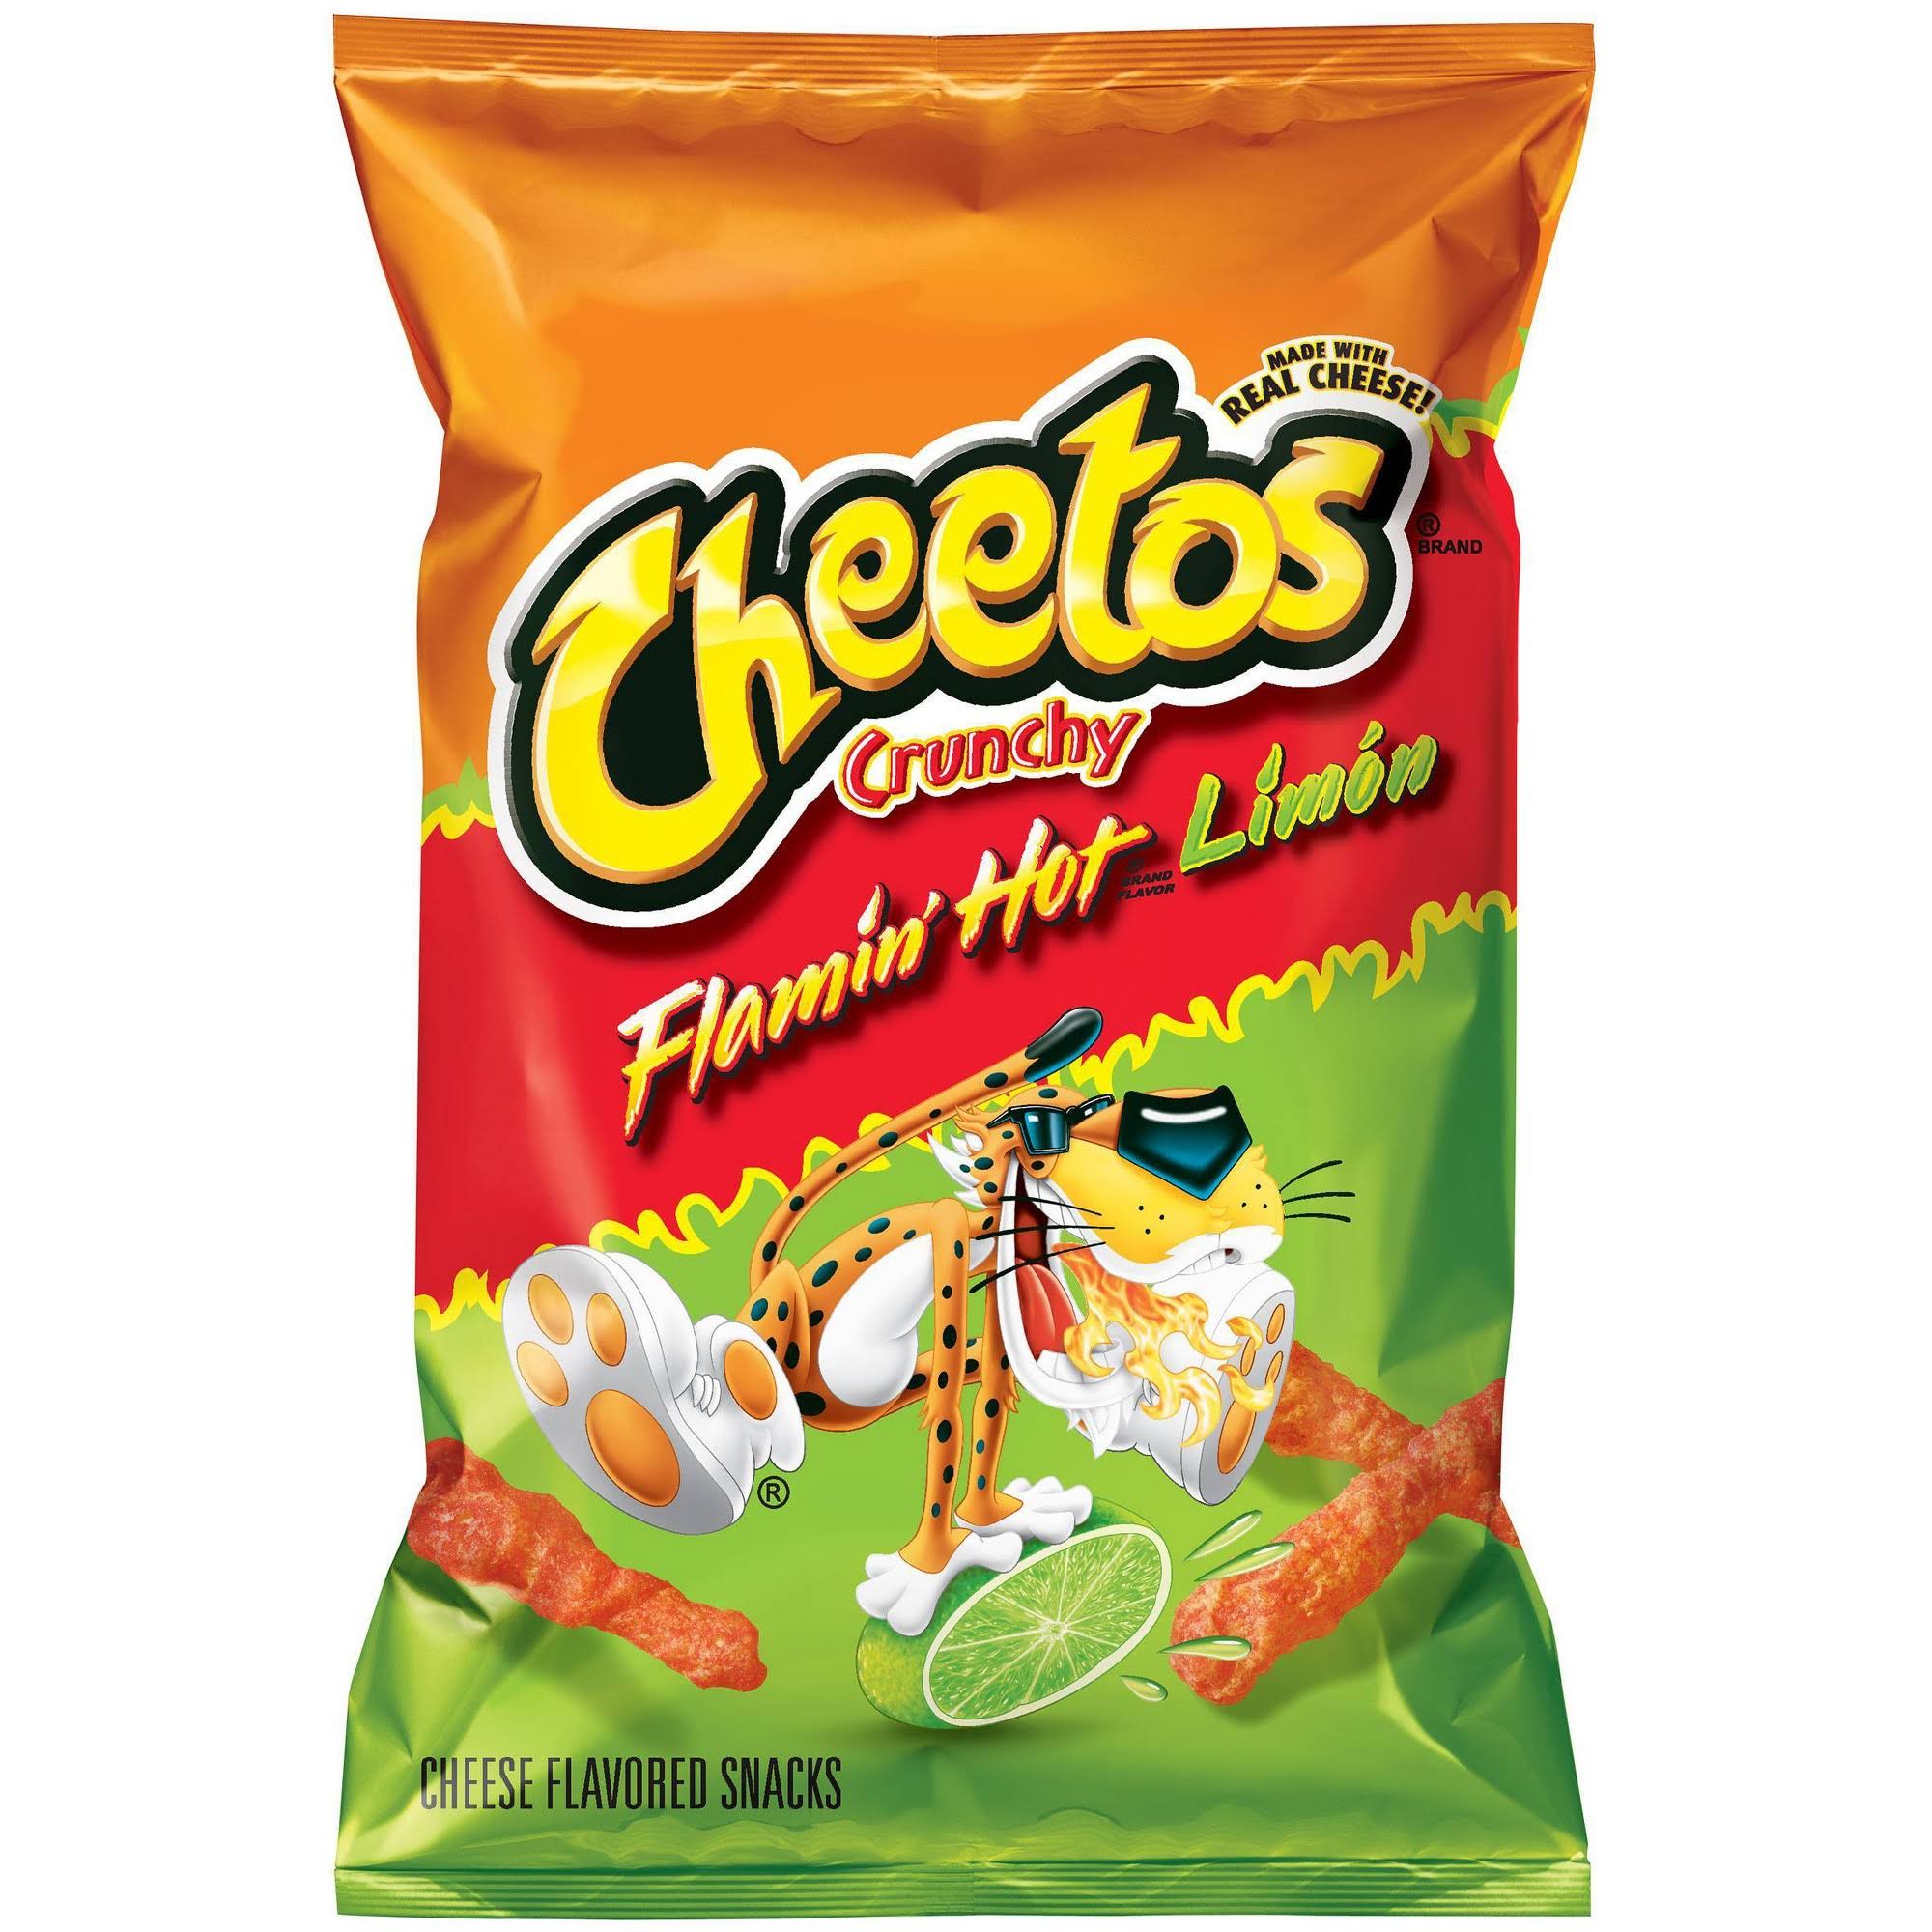 Cheetos Cheese Flavored Snacks, Flamin Hot Limon Flavored, Crunchy - 3.25 oz